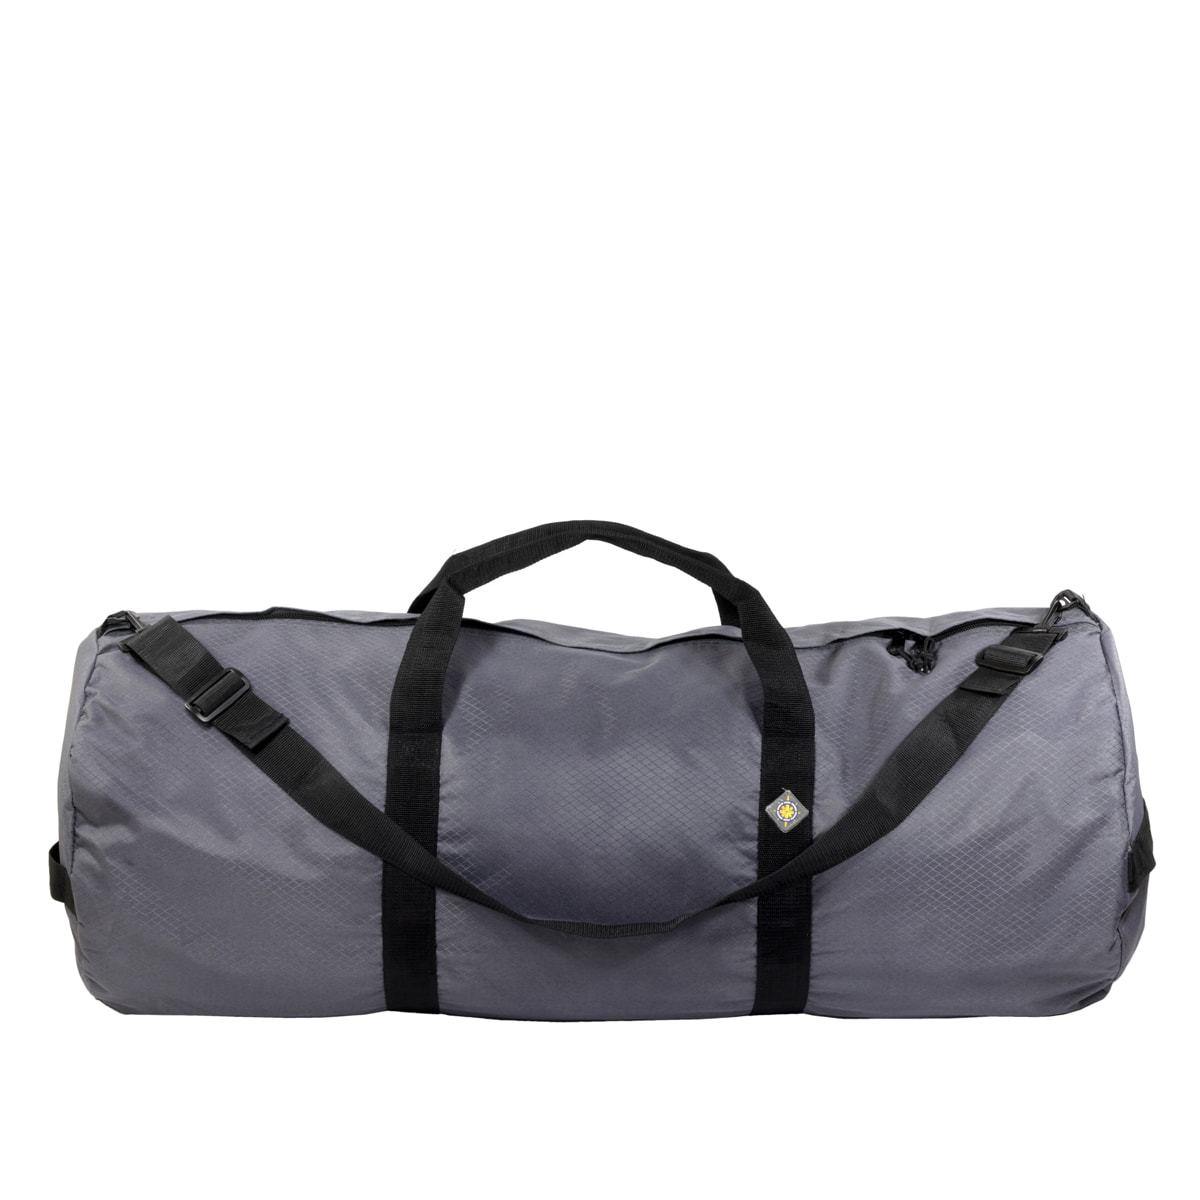 Studio photo the Steel Grey SD1640DLX Standard Duffle by Northstar Bags. 131 liter duffel with diamond ripstop fabric, thick webbing straps, and a large format metal zipper. Guaranteed for life.